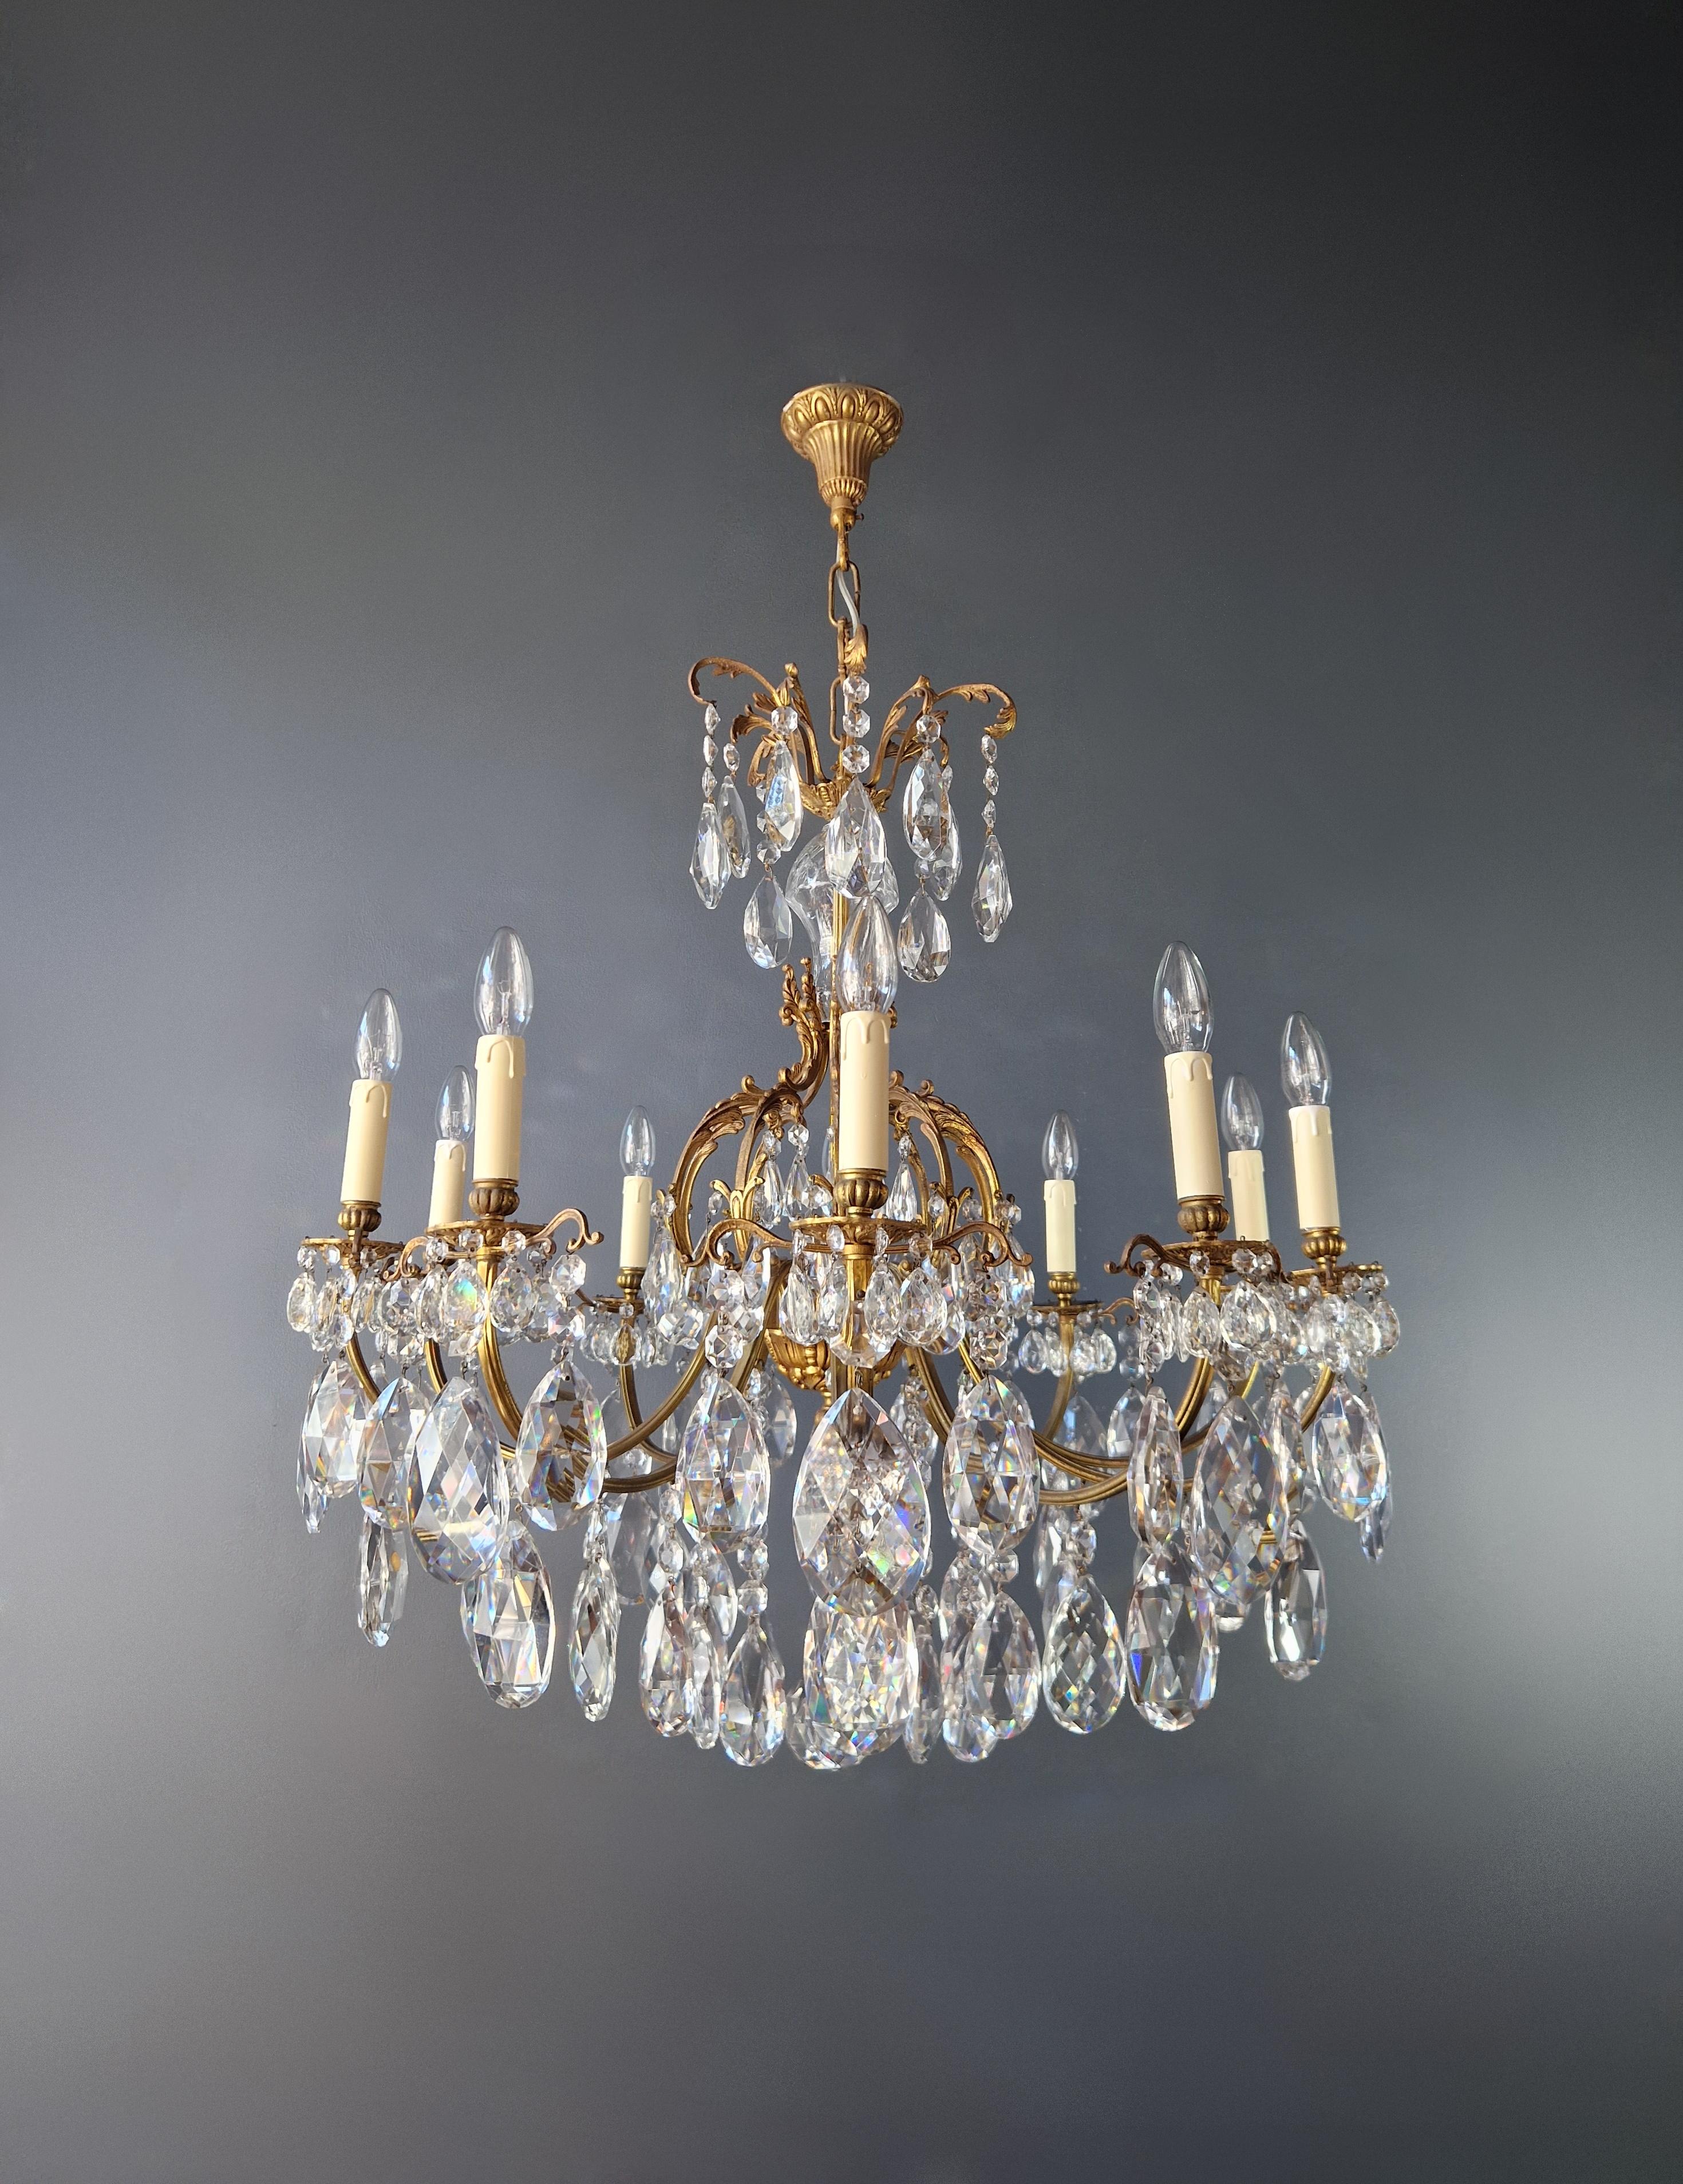 Aesthetic Movement Art Nouveau Style Brass Crystal Chandelier Gold Foliage  For Sale